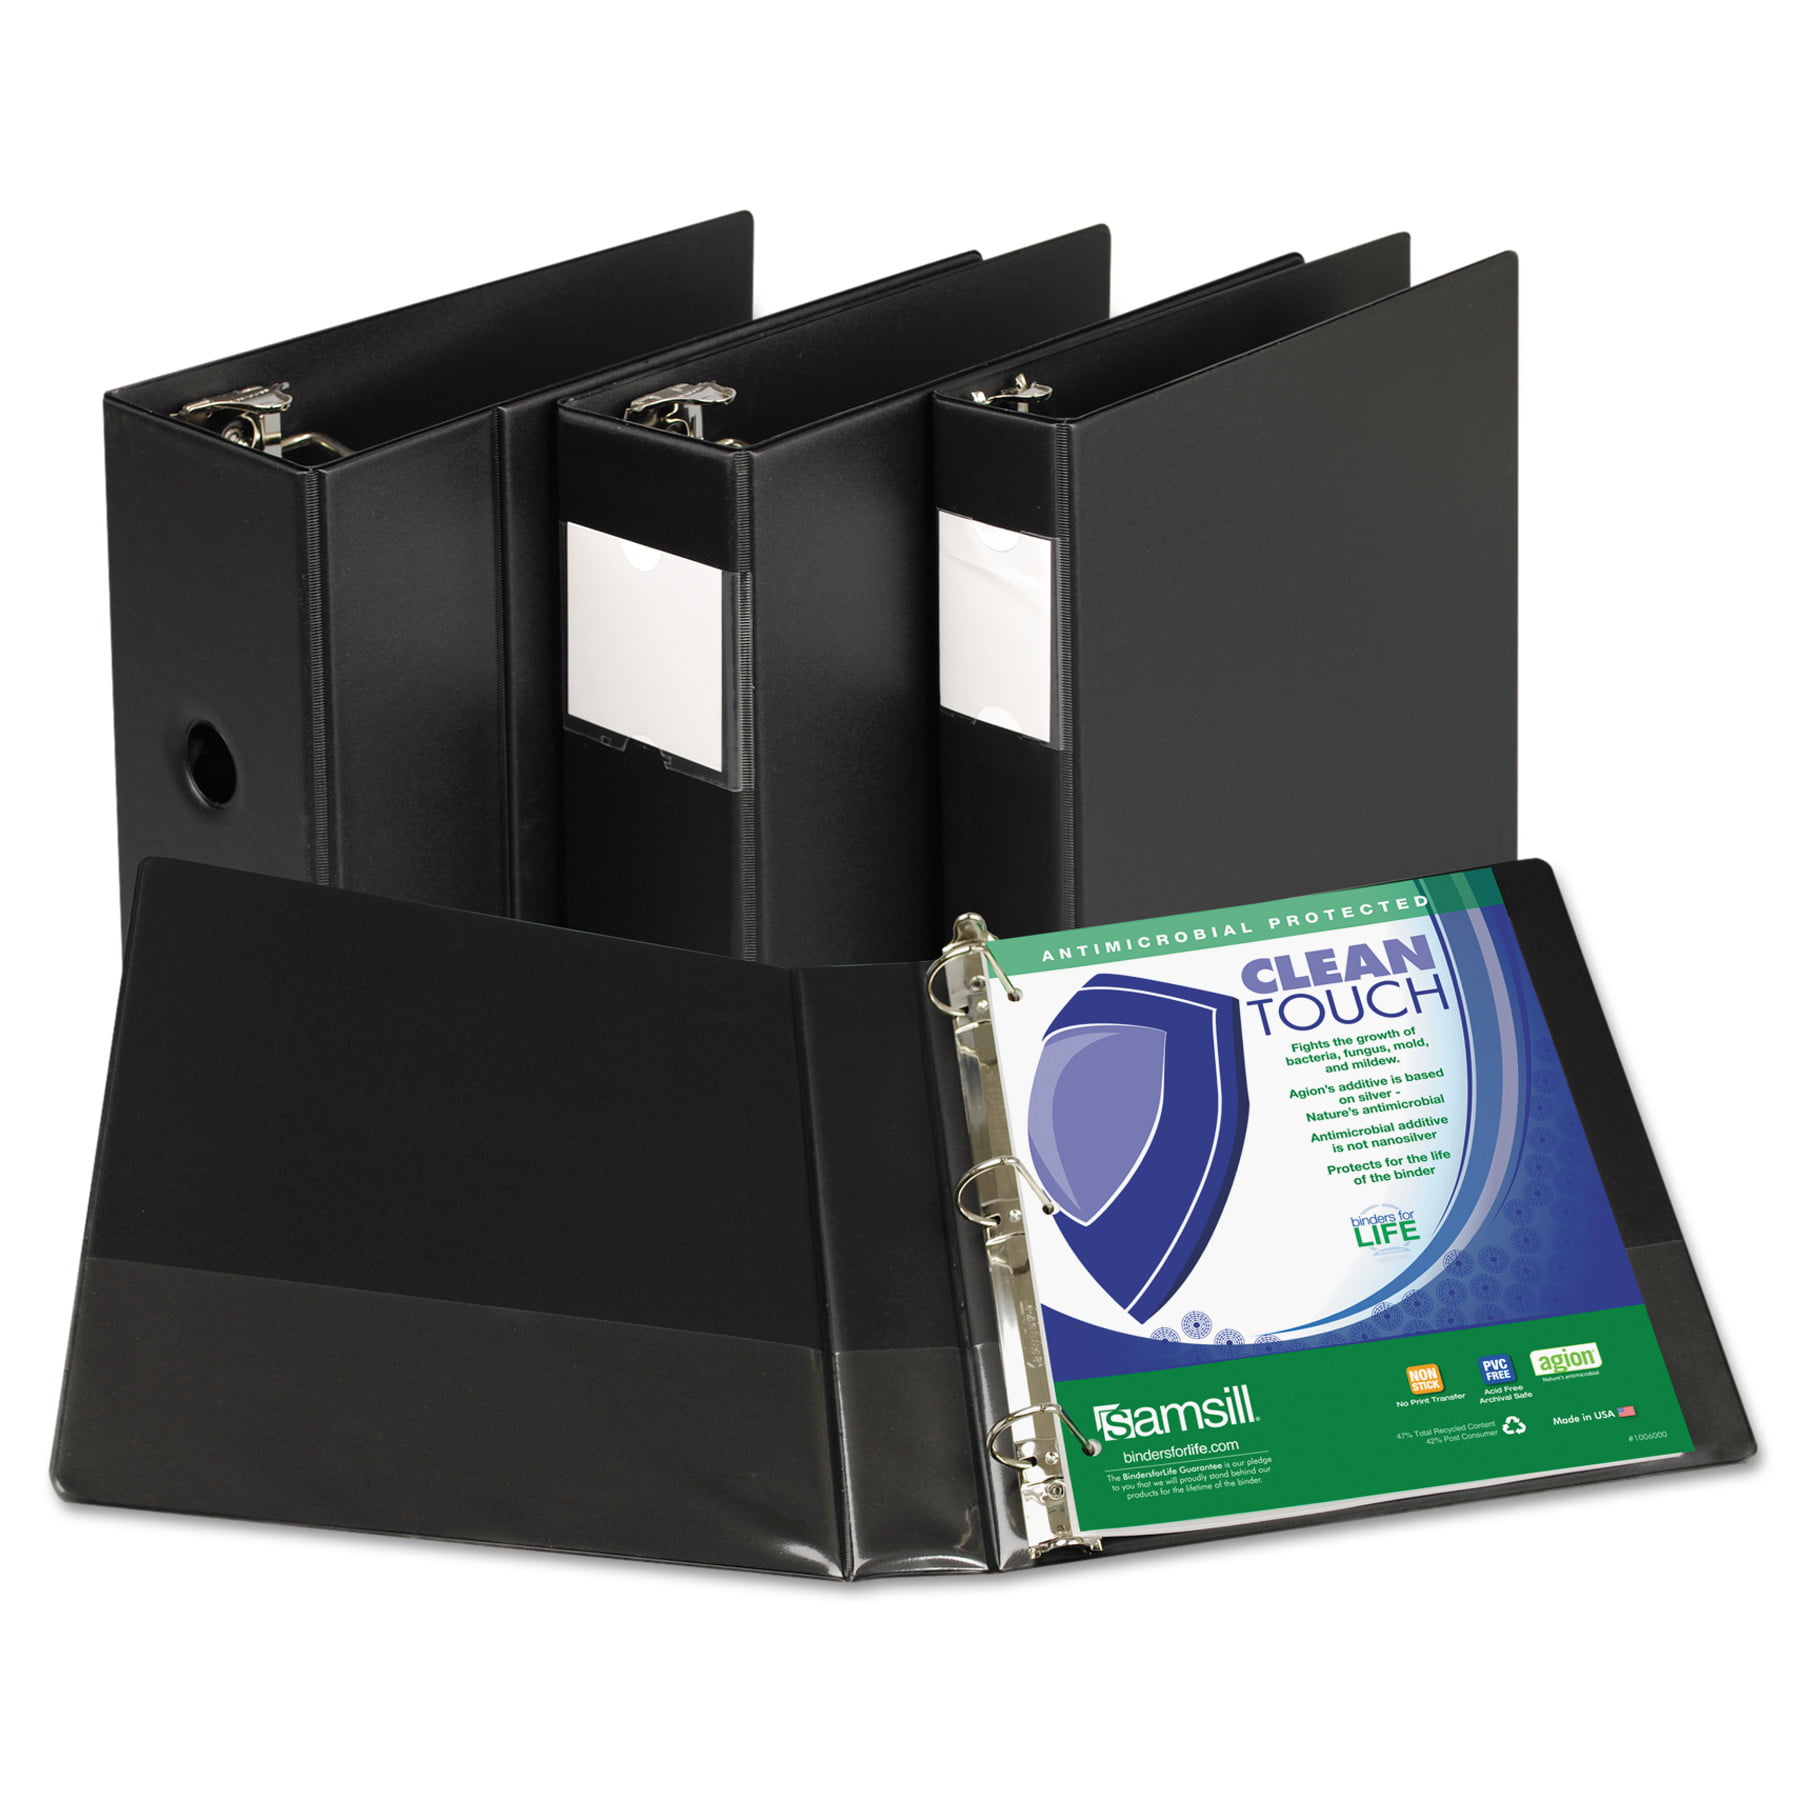 Locking D-Ring Black Samsill 16350 Clean Touch 3 Ring Binder Reference Binder with Label Holder Protected by Antimicrobial Additive 1.5 Inch Capacity 